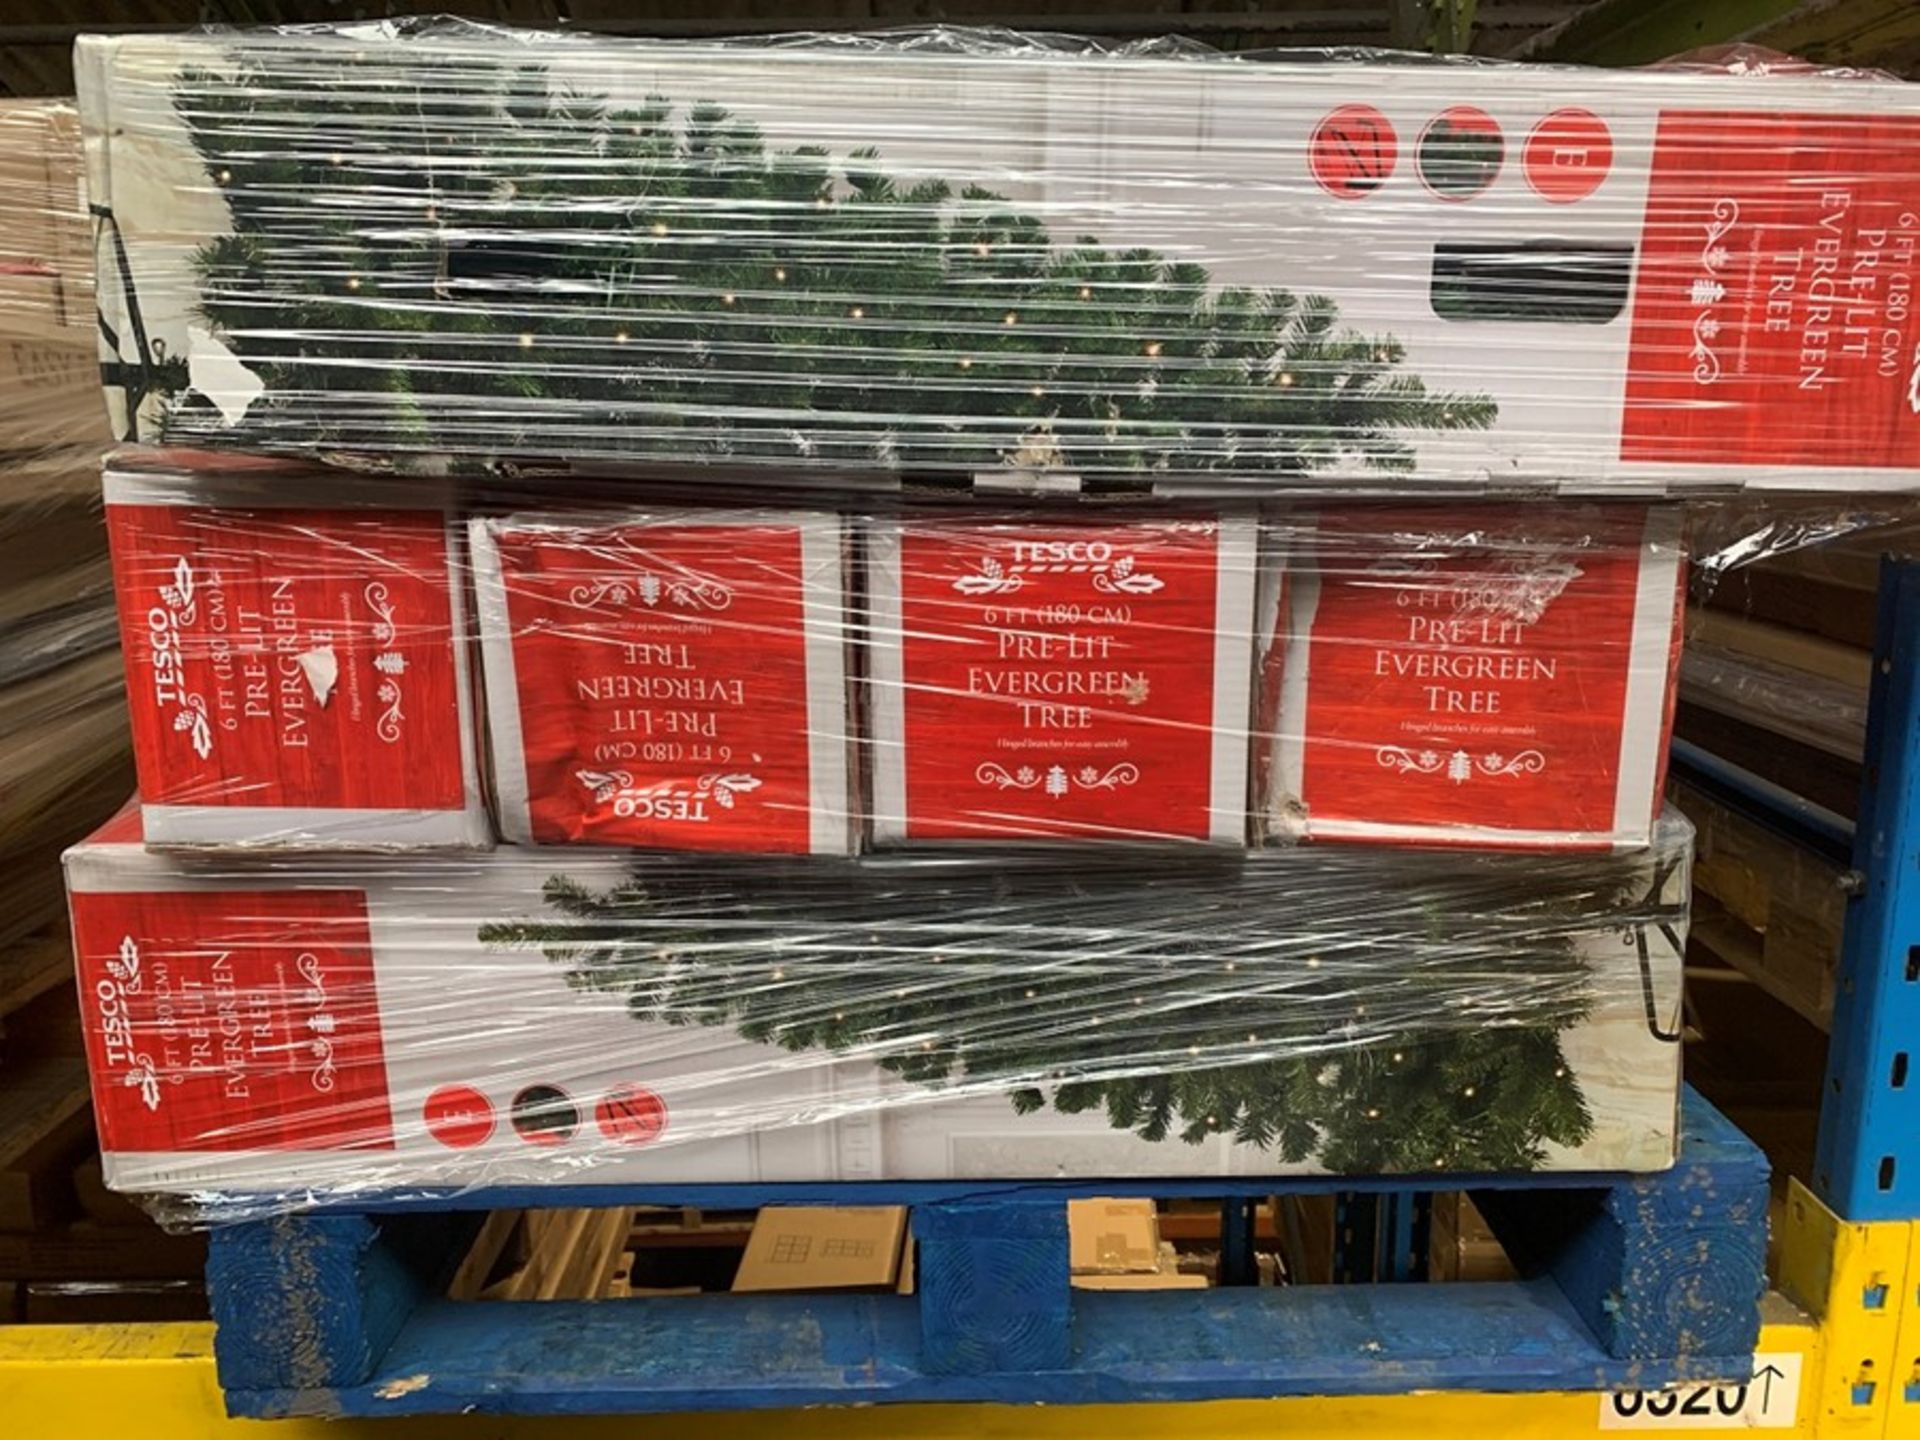 1 LOT TO CONTAIN 15 TESCO CHRISTMAS TREES IN 4FT AND 6FT SIZING (PUBLIC VIEWING AVAILABLE)